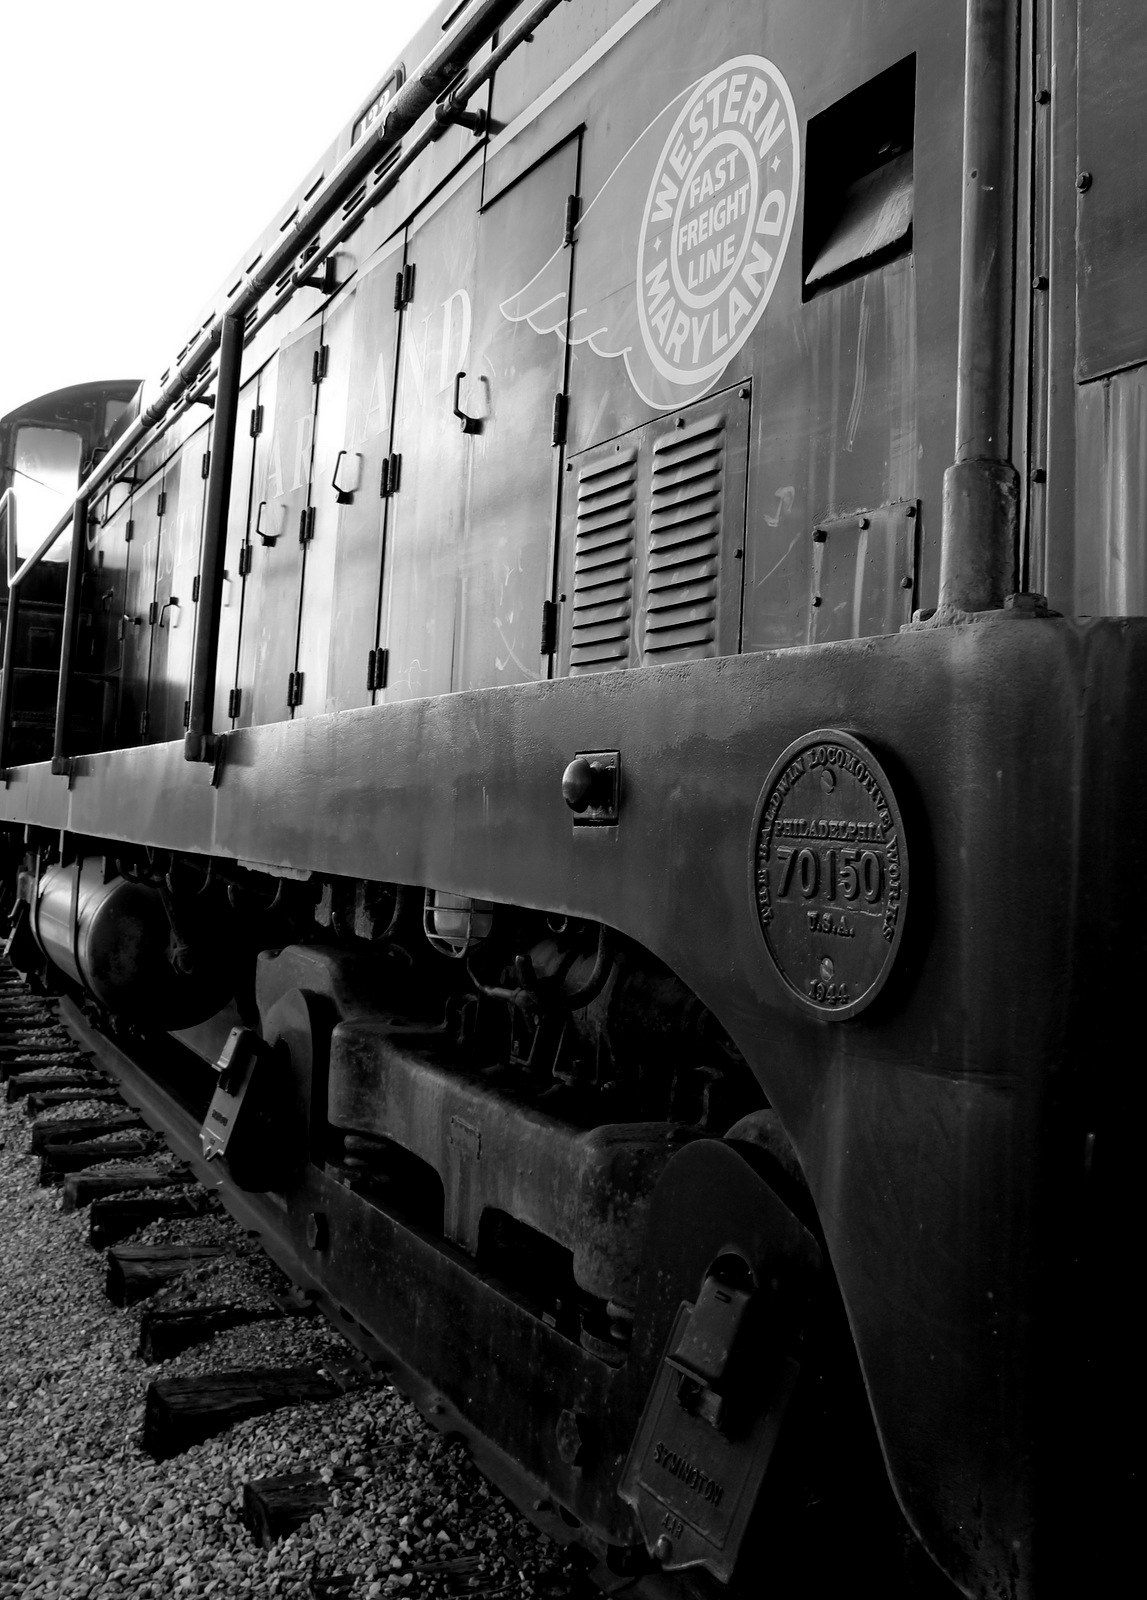 Diesel engine 132 rolling stock at the Hagerstown Roundhouse Museum.